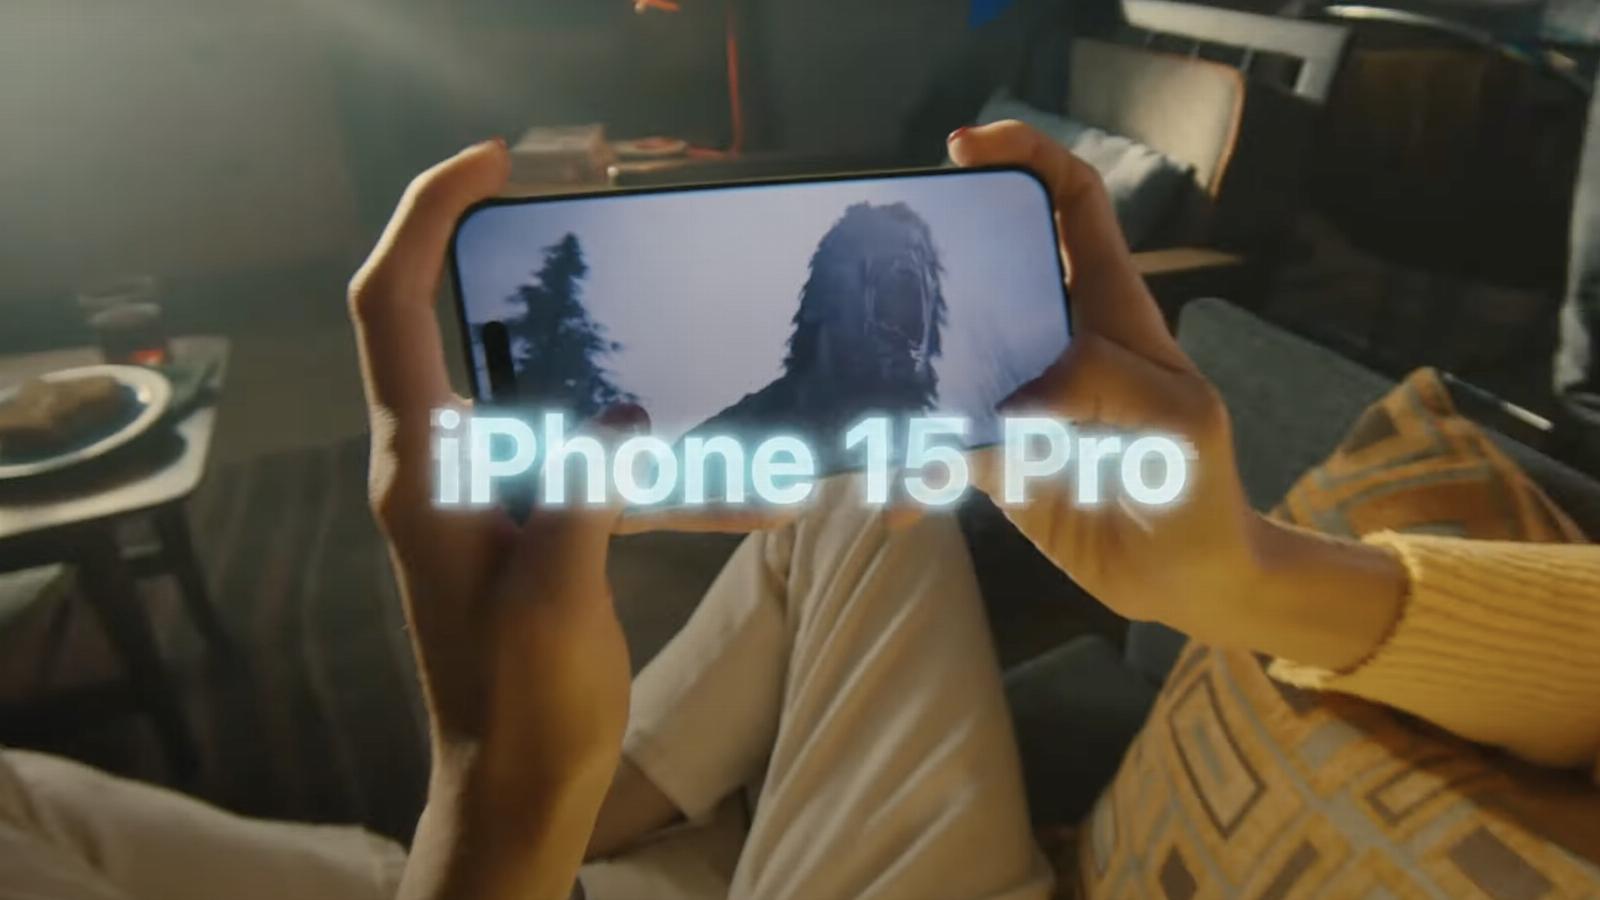 The iPhone 15 Pro is the next AAA game console